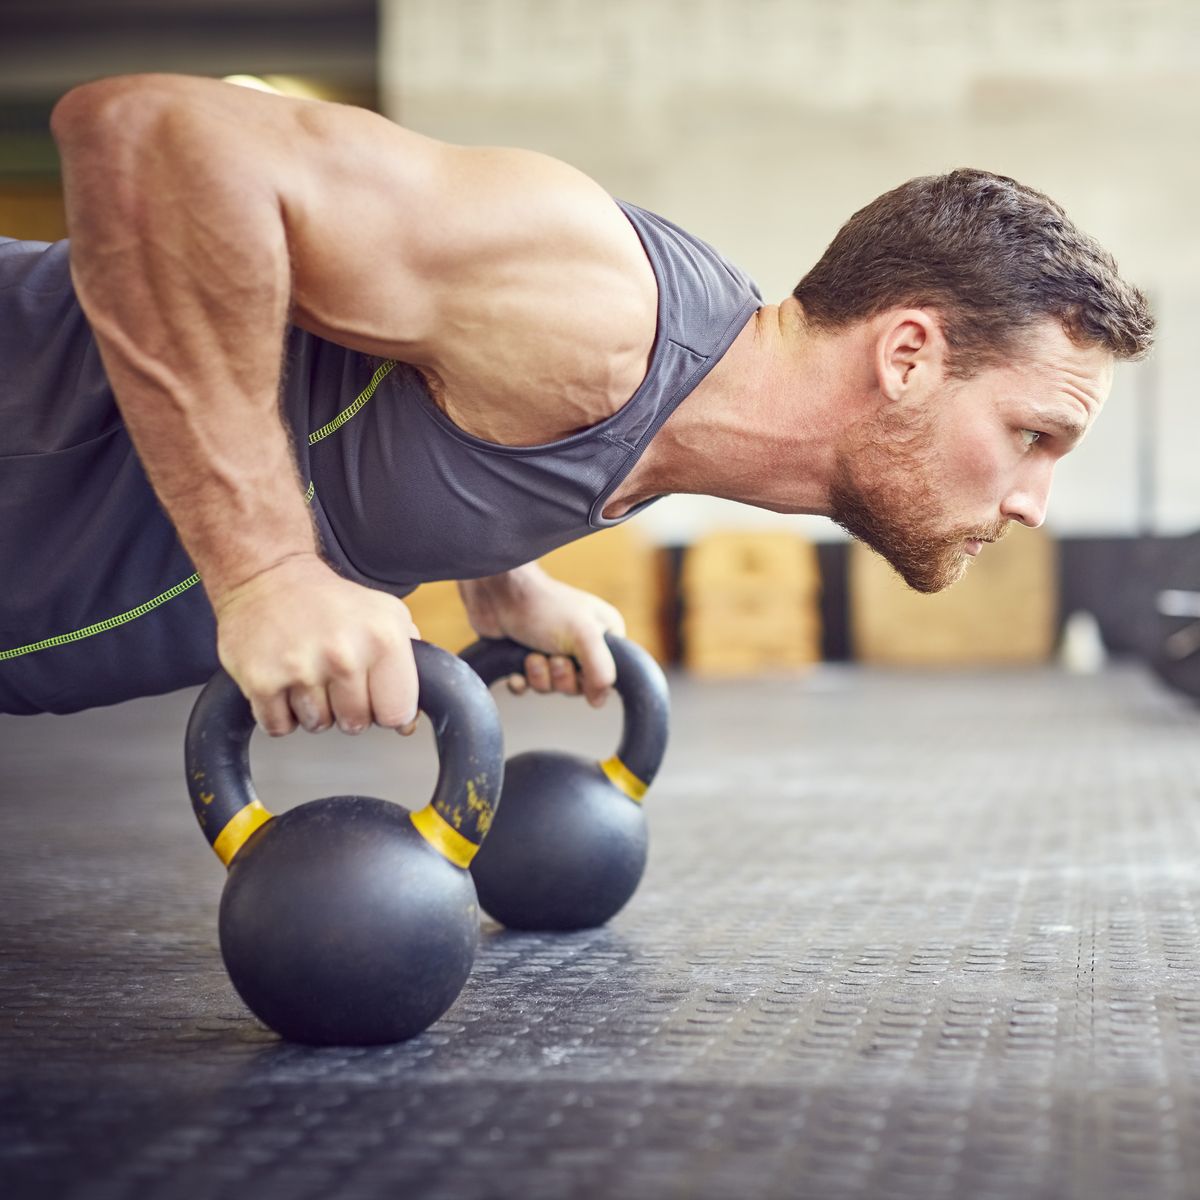 Home Workout: Train Back and Legs with This Kettlebell Muscle Builder